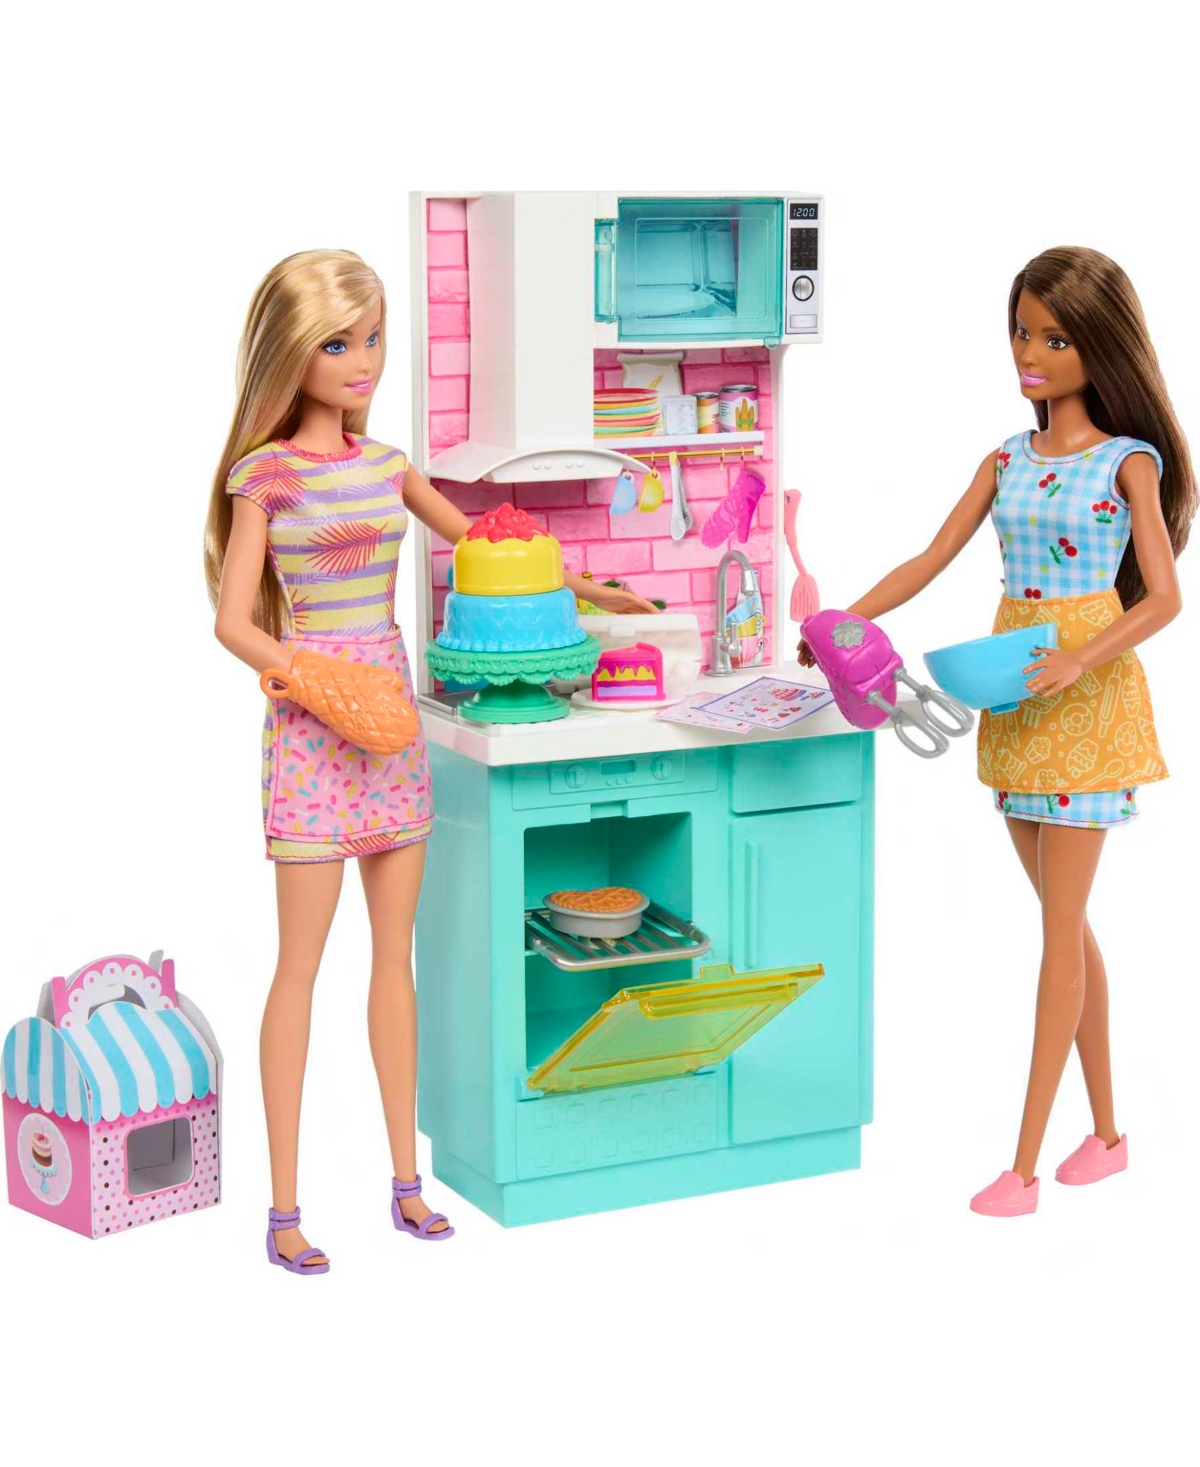 Shop Barbie Celebration Fun Dolls And Accessories, Baking Playset With 2 Dolls, Oven 15 Plus Accessories In Multicolor